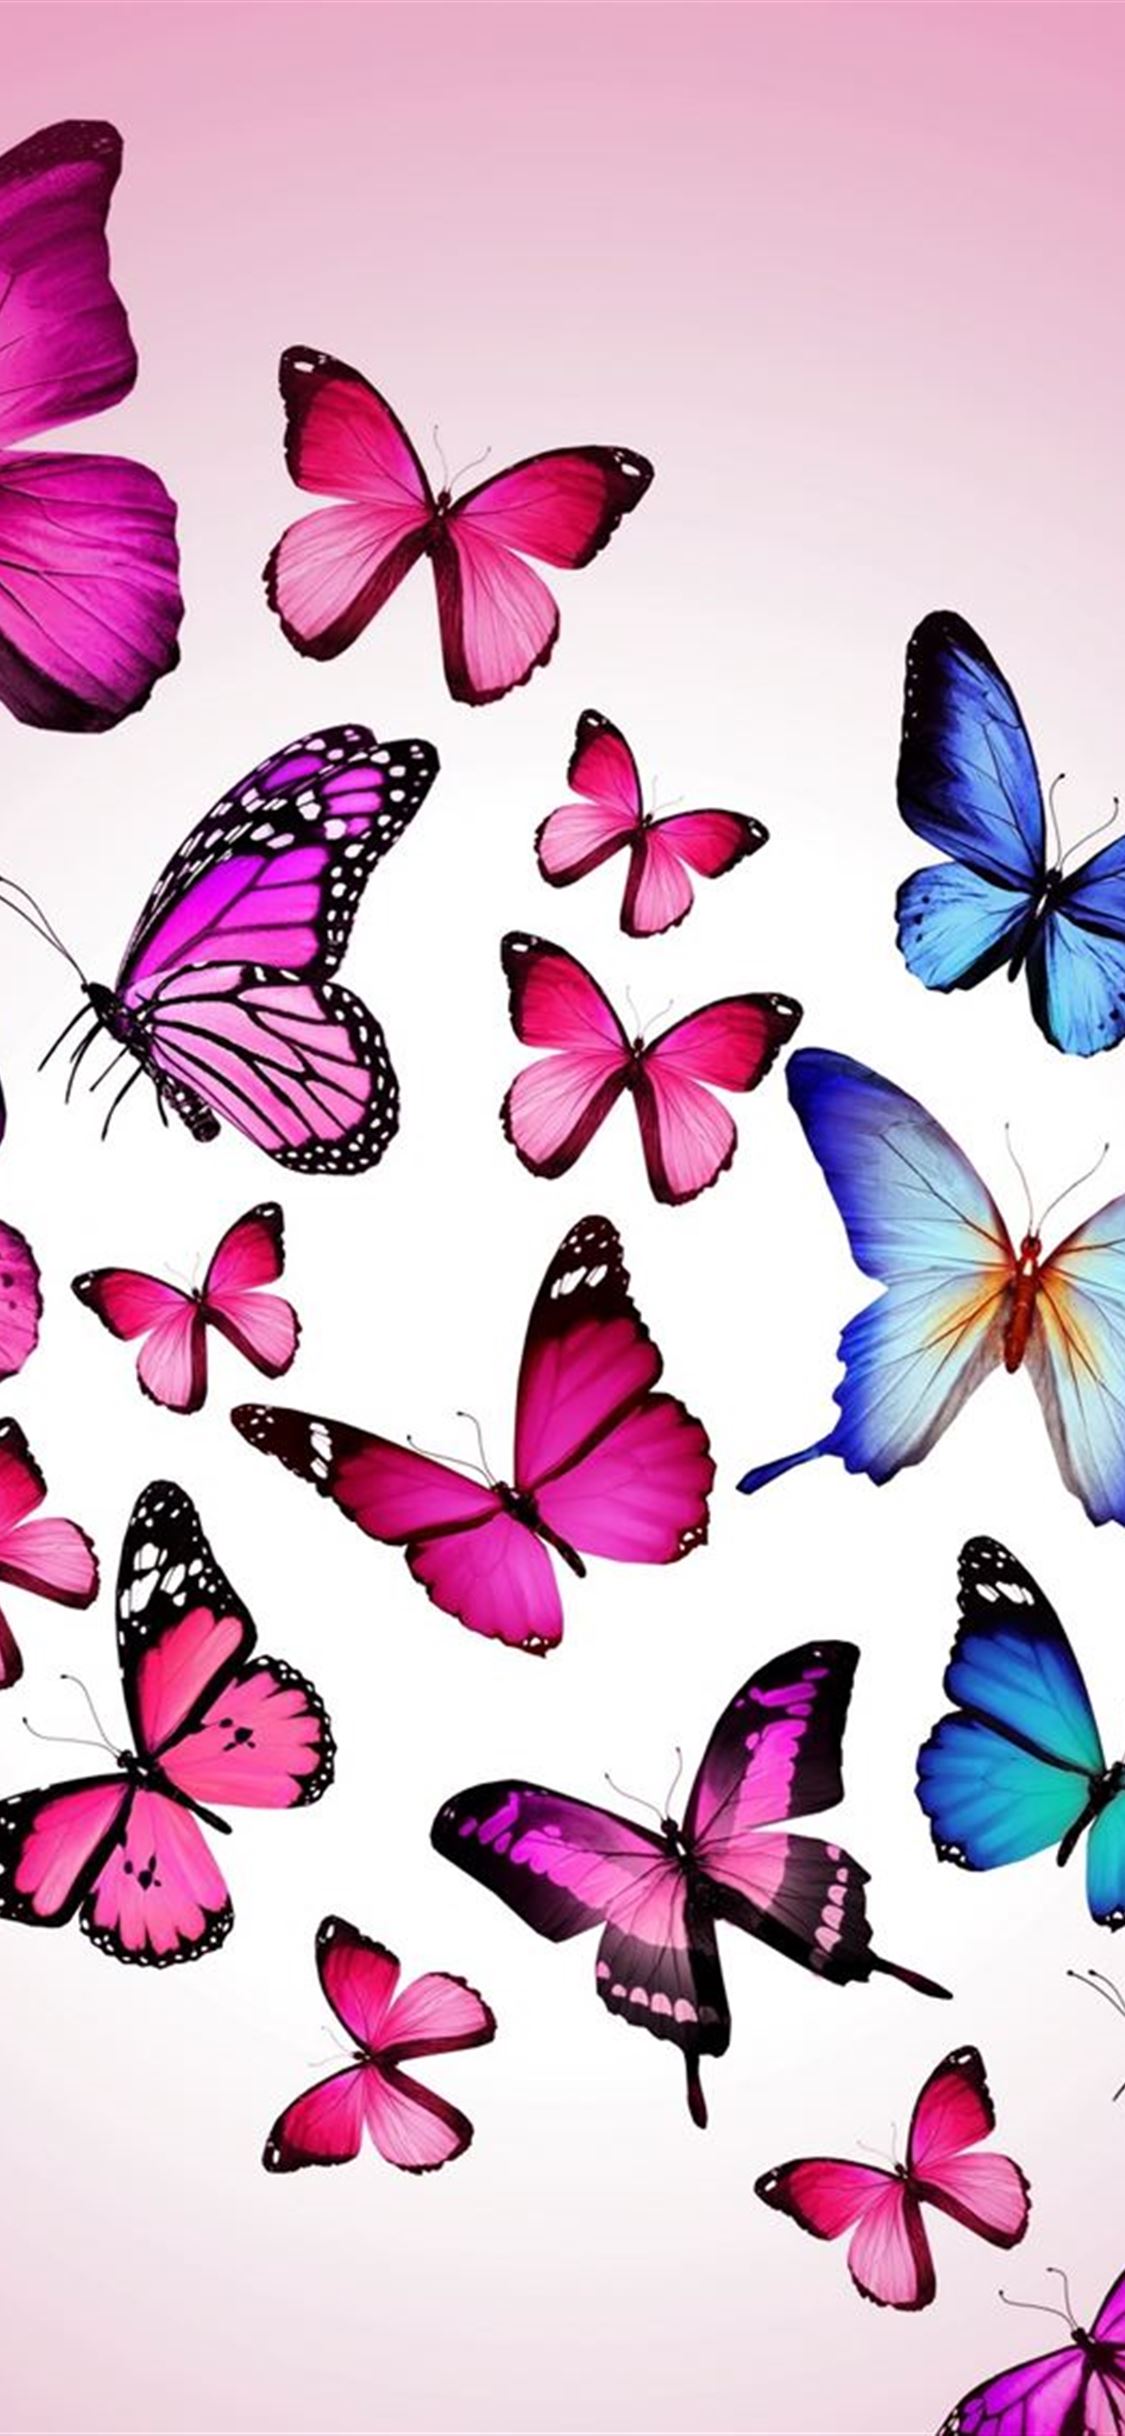 Butterfly Drawing Flying Colorful Background Pink iPhone wallpaper 